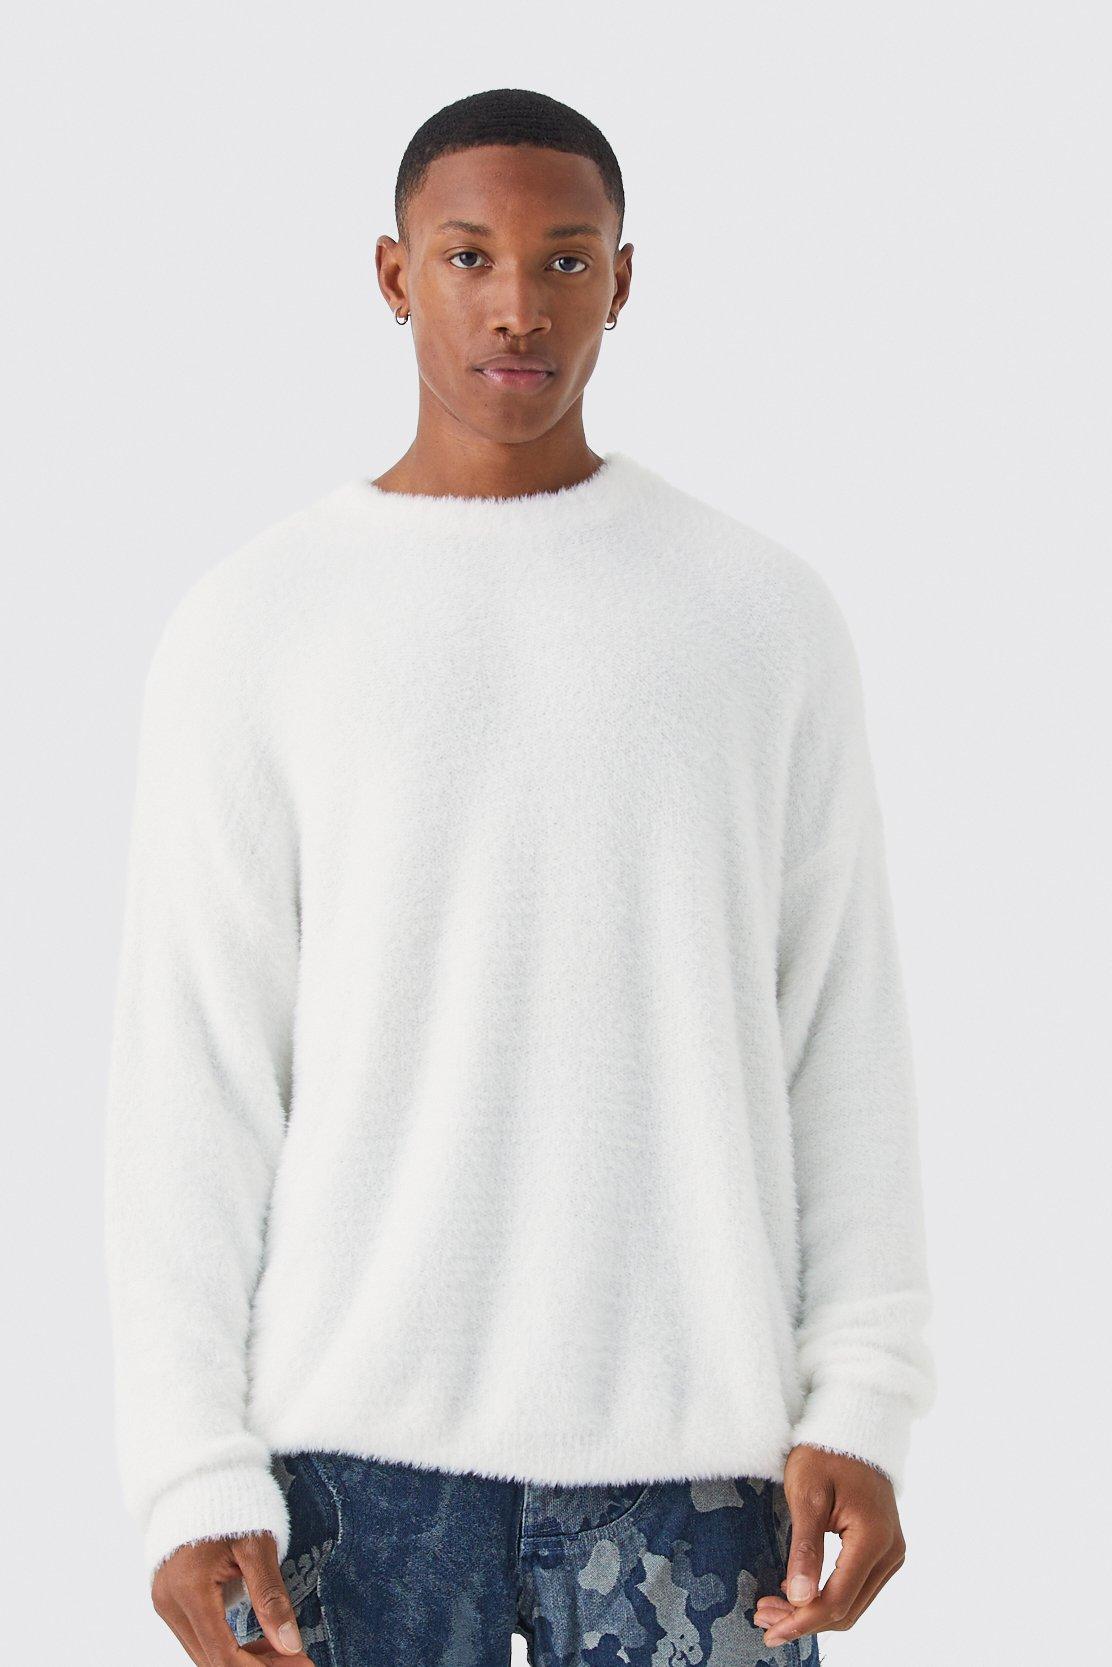 boohooMAN Men's Oversized Fluffy Knitted Sweater